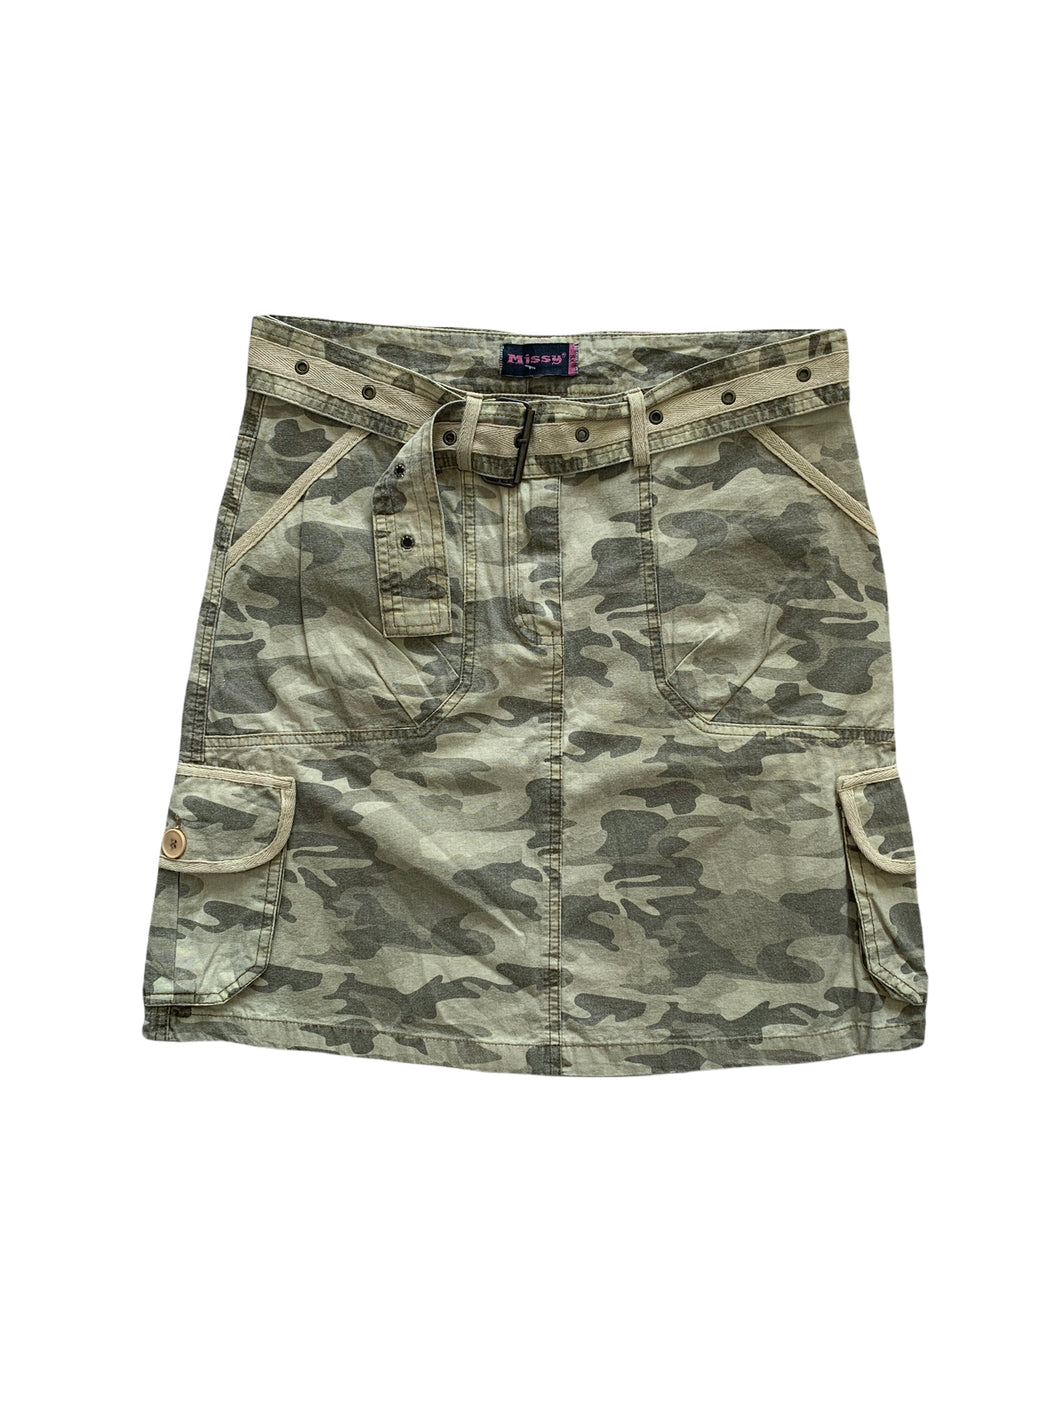 Iconic Y2K camo skirt with her own belt